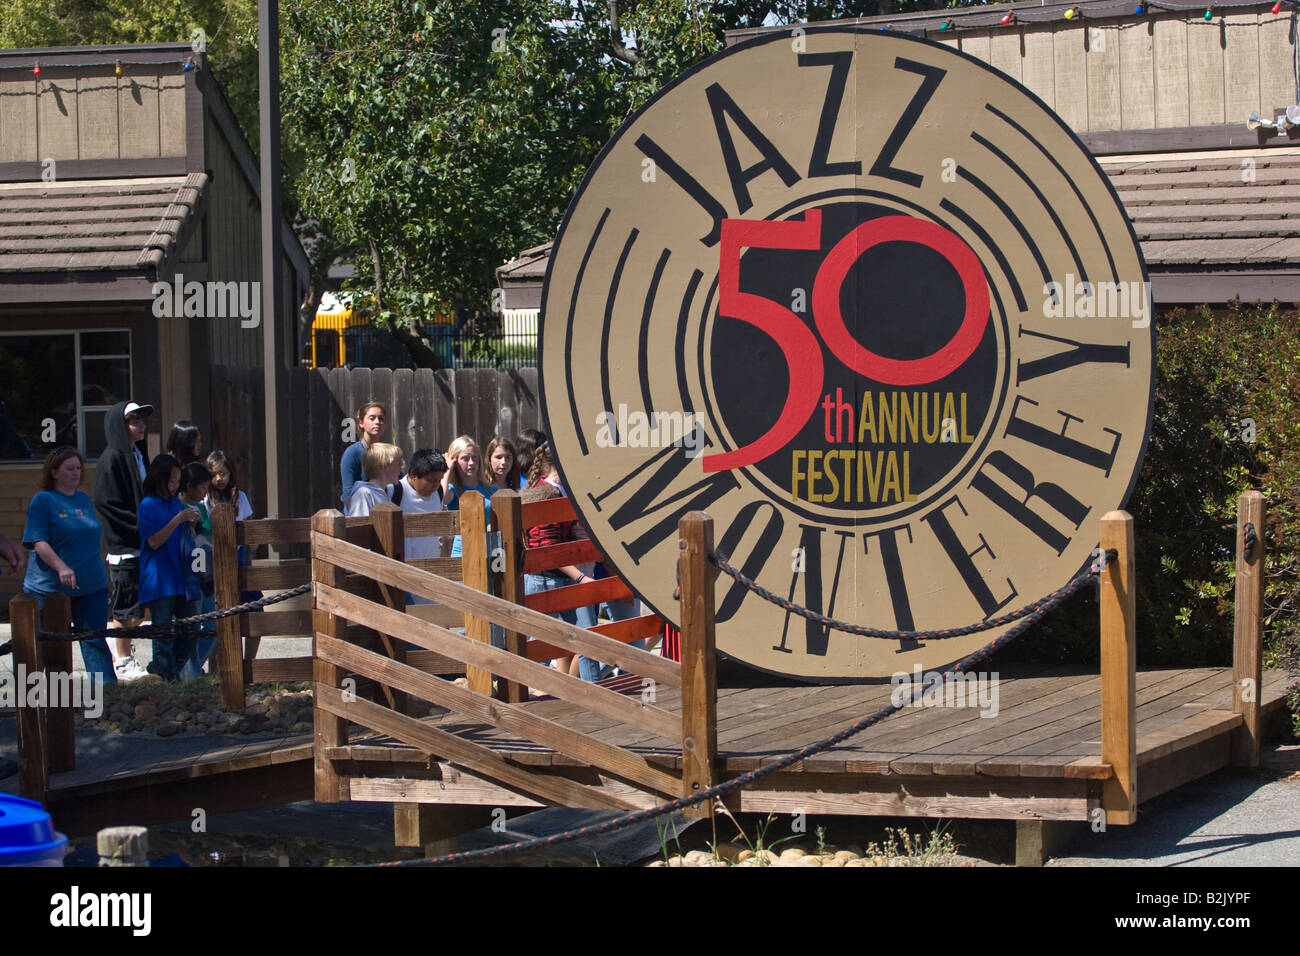 Sign for the 50th annual MONTEREY JAZZ FESTIVAL at the fairgrounds where the event is held MONTEREY CALIFORNIA Stock Photo